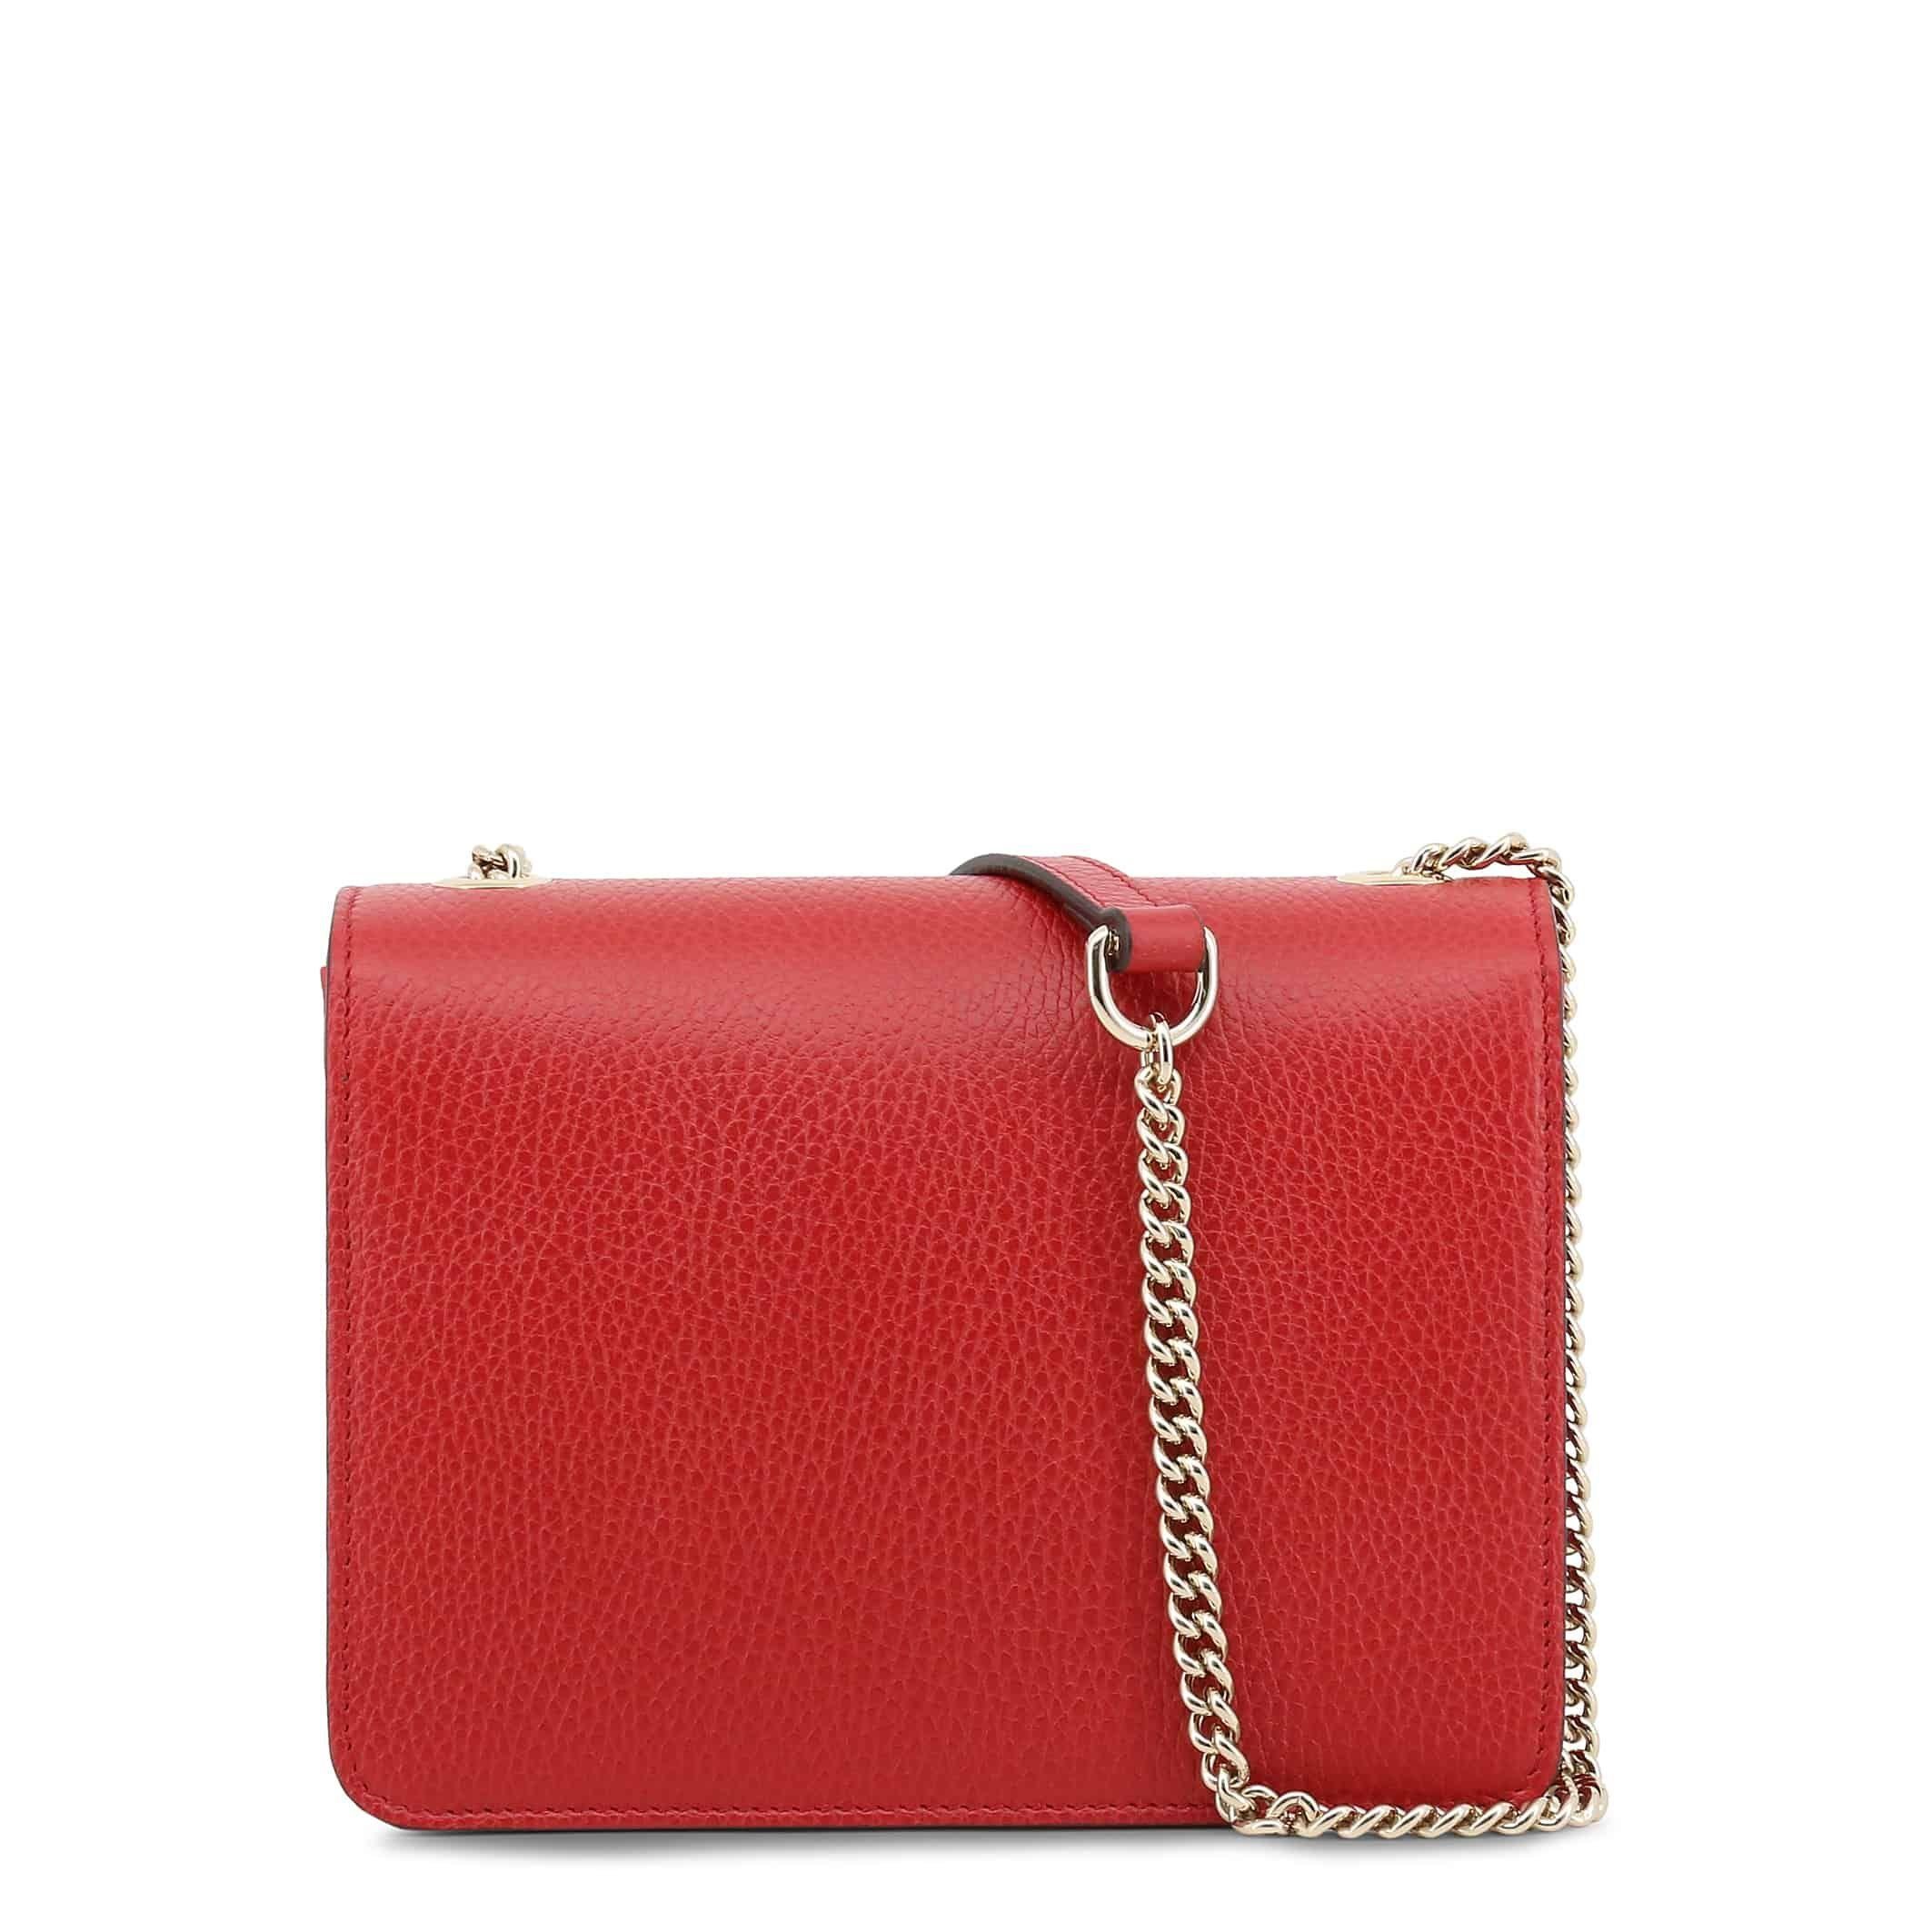 Made in: Italy Gender: Woman Type: Across-body Material: leather Main fastening: metallic Shoulder strap: shoulder strap Inside: 2 compartments lined Internal pockets: 1 Width cm: 20 Height cm: 16 Depth cm: 7 Details: dustbag included visible